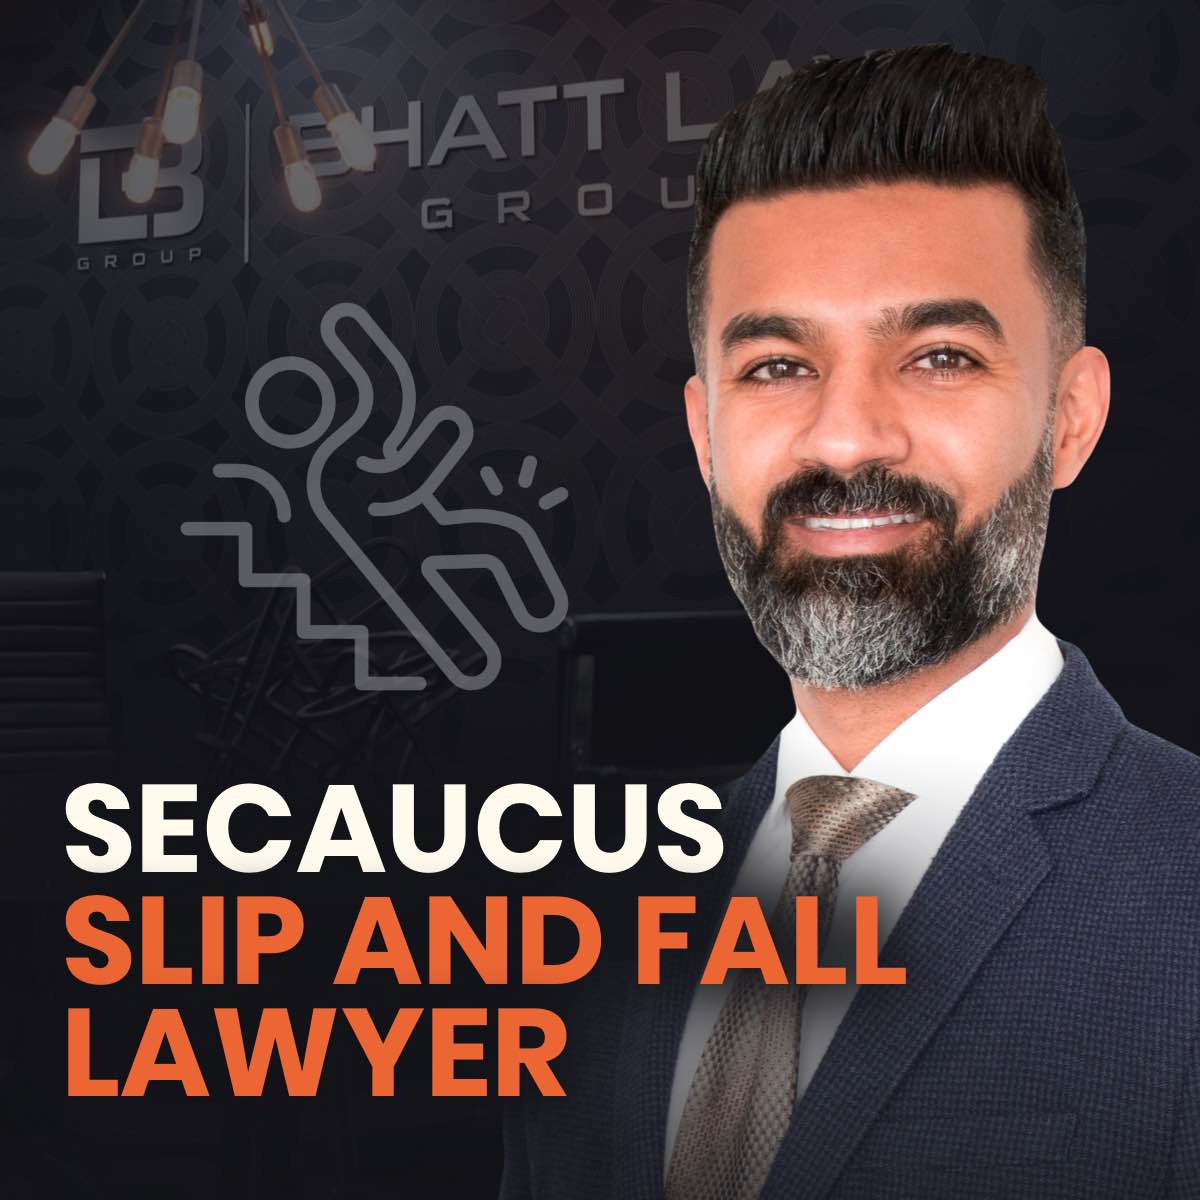 Secaucus Slip and Fall Lawyer